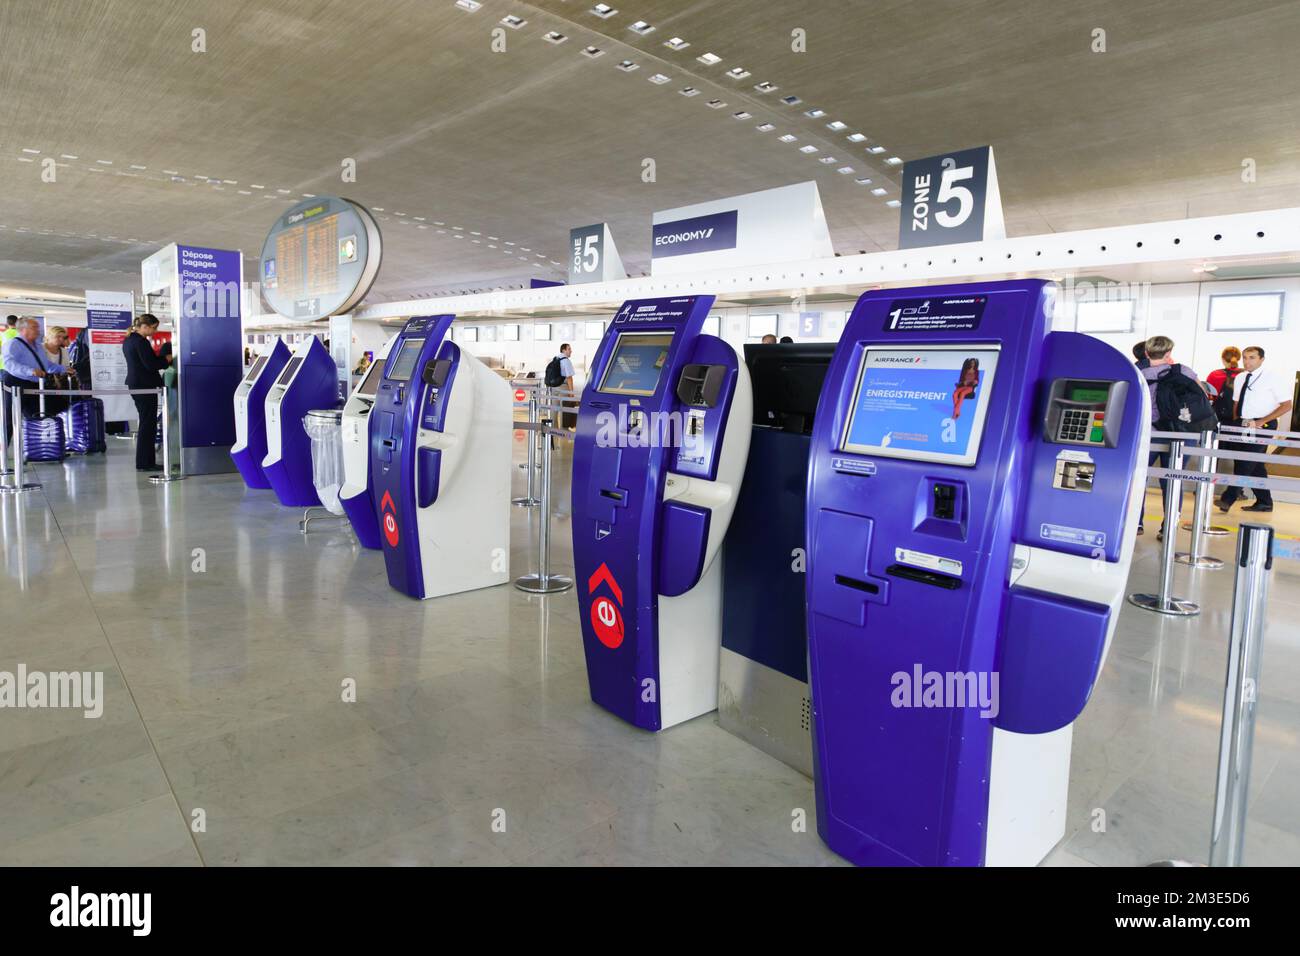 PARIS - SEPTEMBER 10: Charles de Gaulle Airport interior on September 10, 2014 in Paris, France. Paris Charles de Gaulle Airport, also known as Roissy Stock Photo